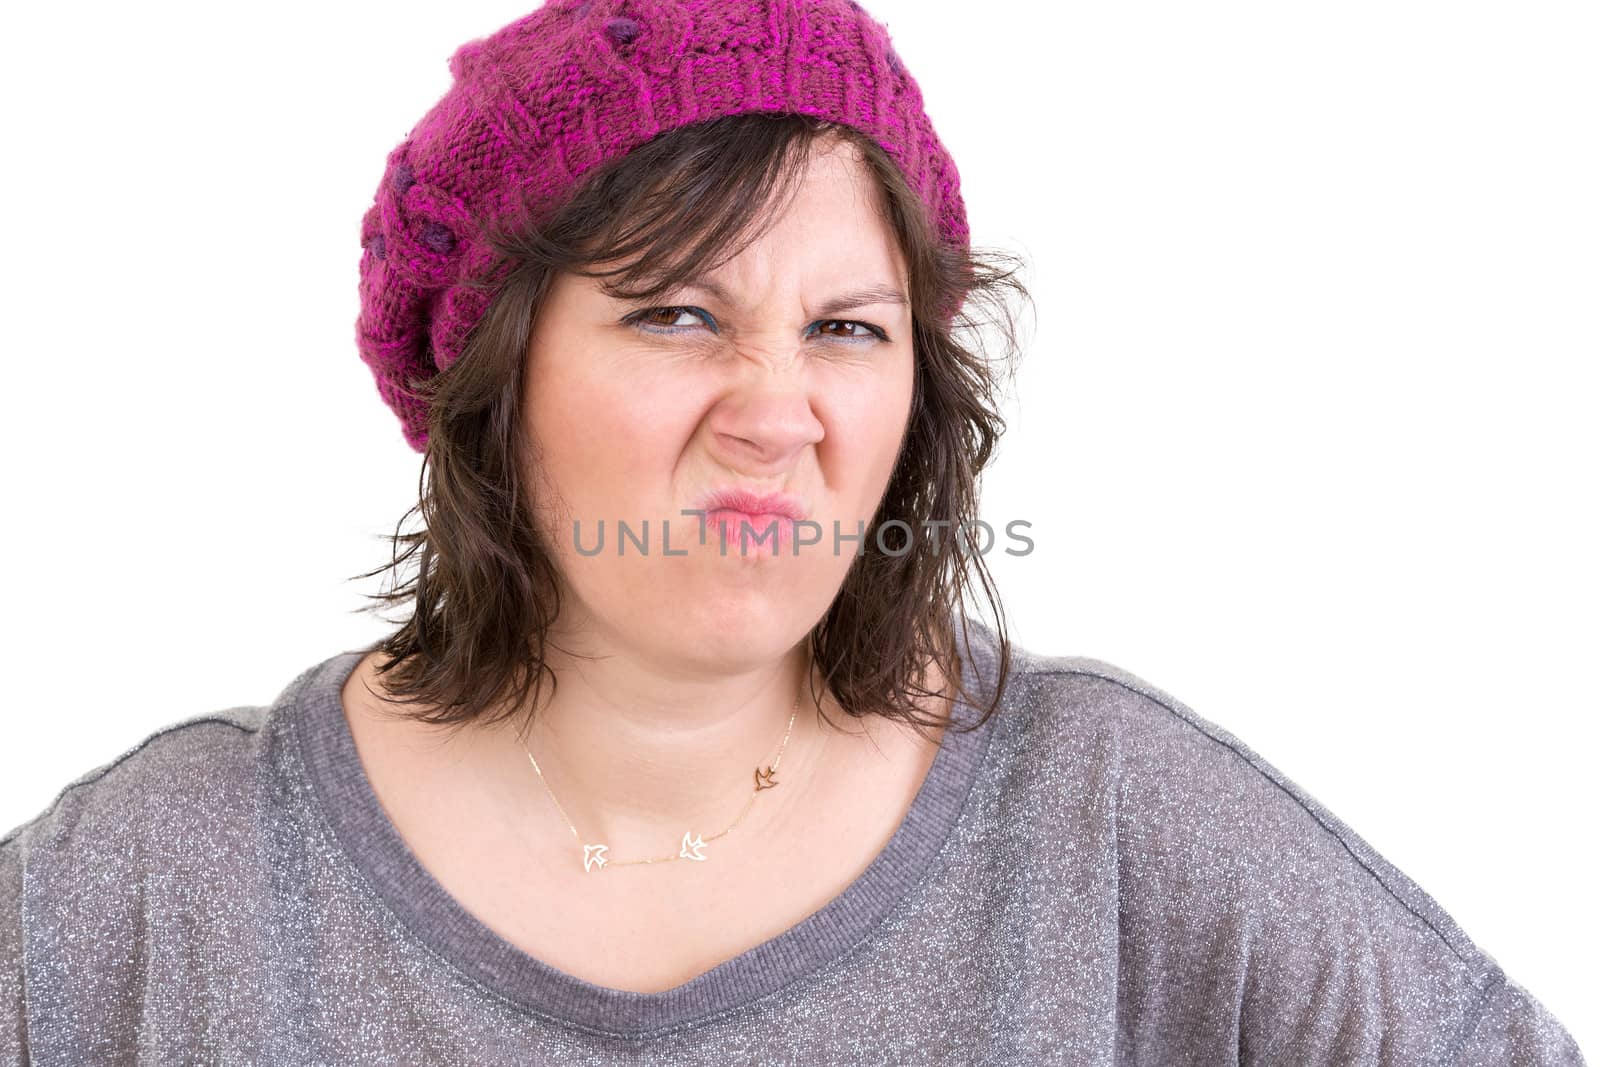 Disdainful woman in a purple knitted beanie screwing up her nose in disgust and dislike, head and shoulders isolated on white